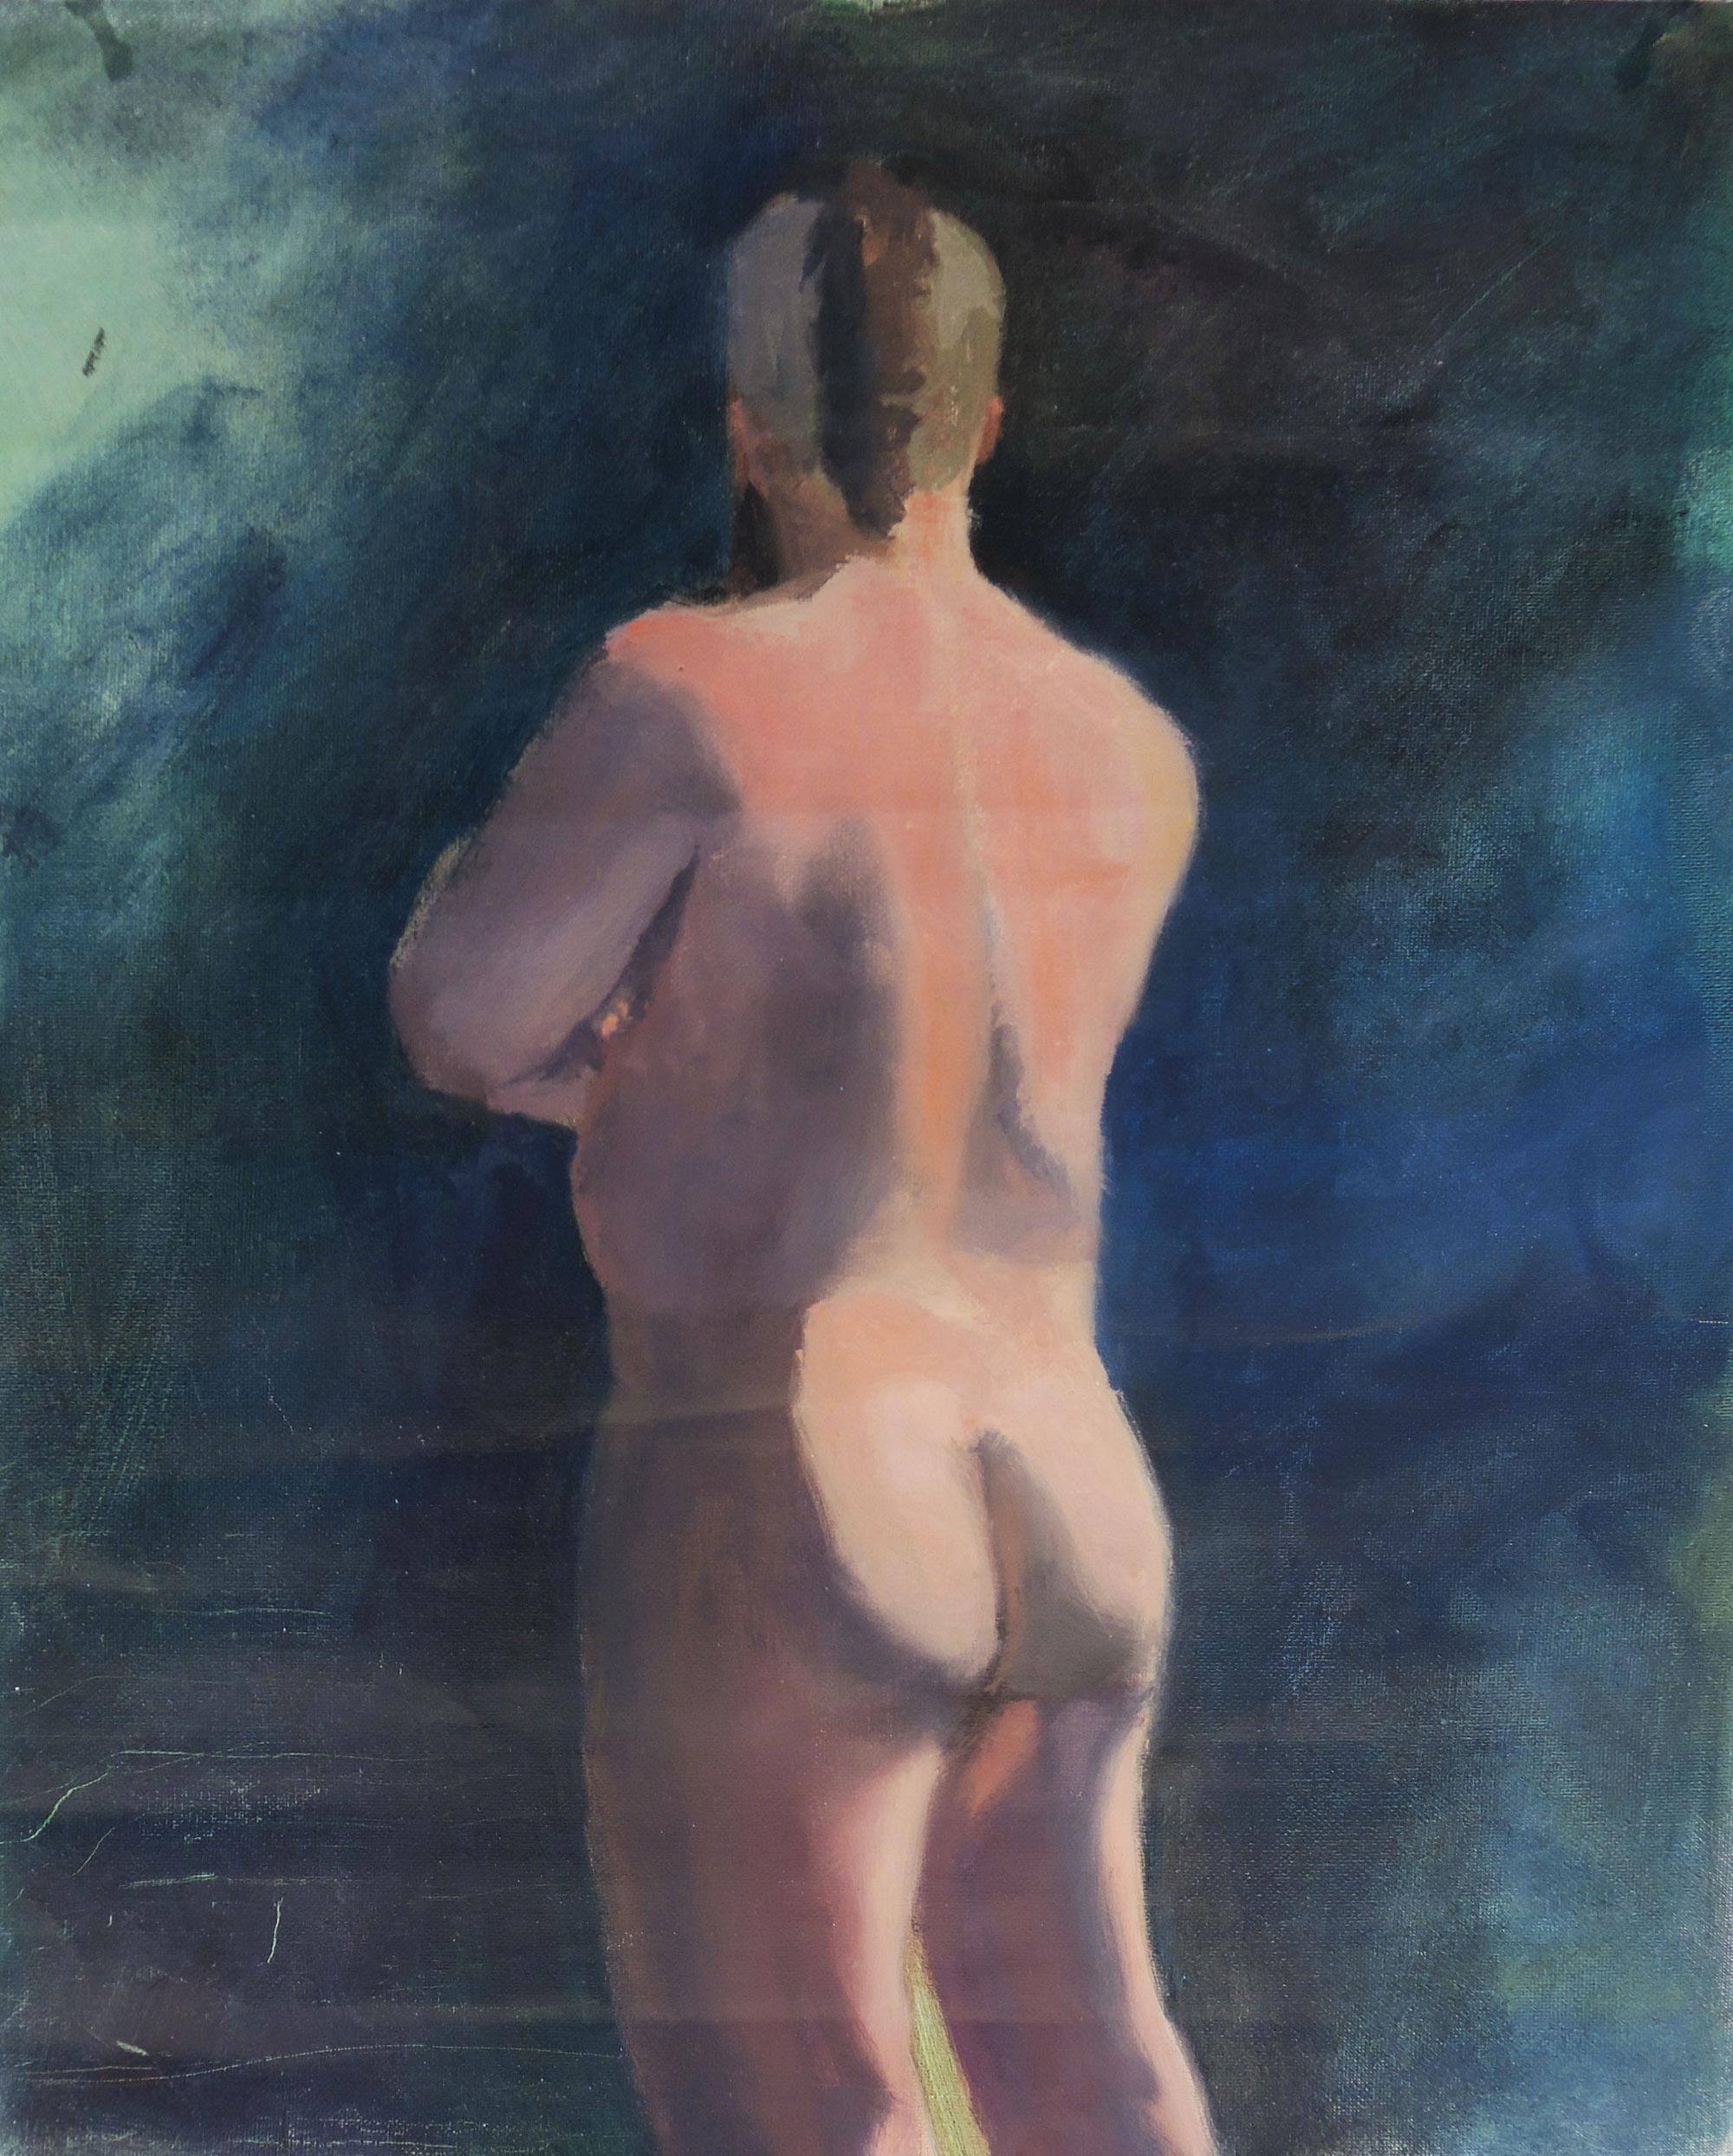 A painting by Robert Gomez of a nude figure from behind